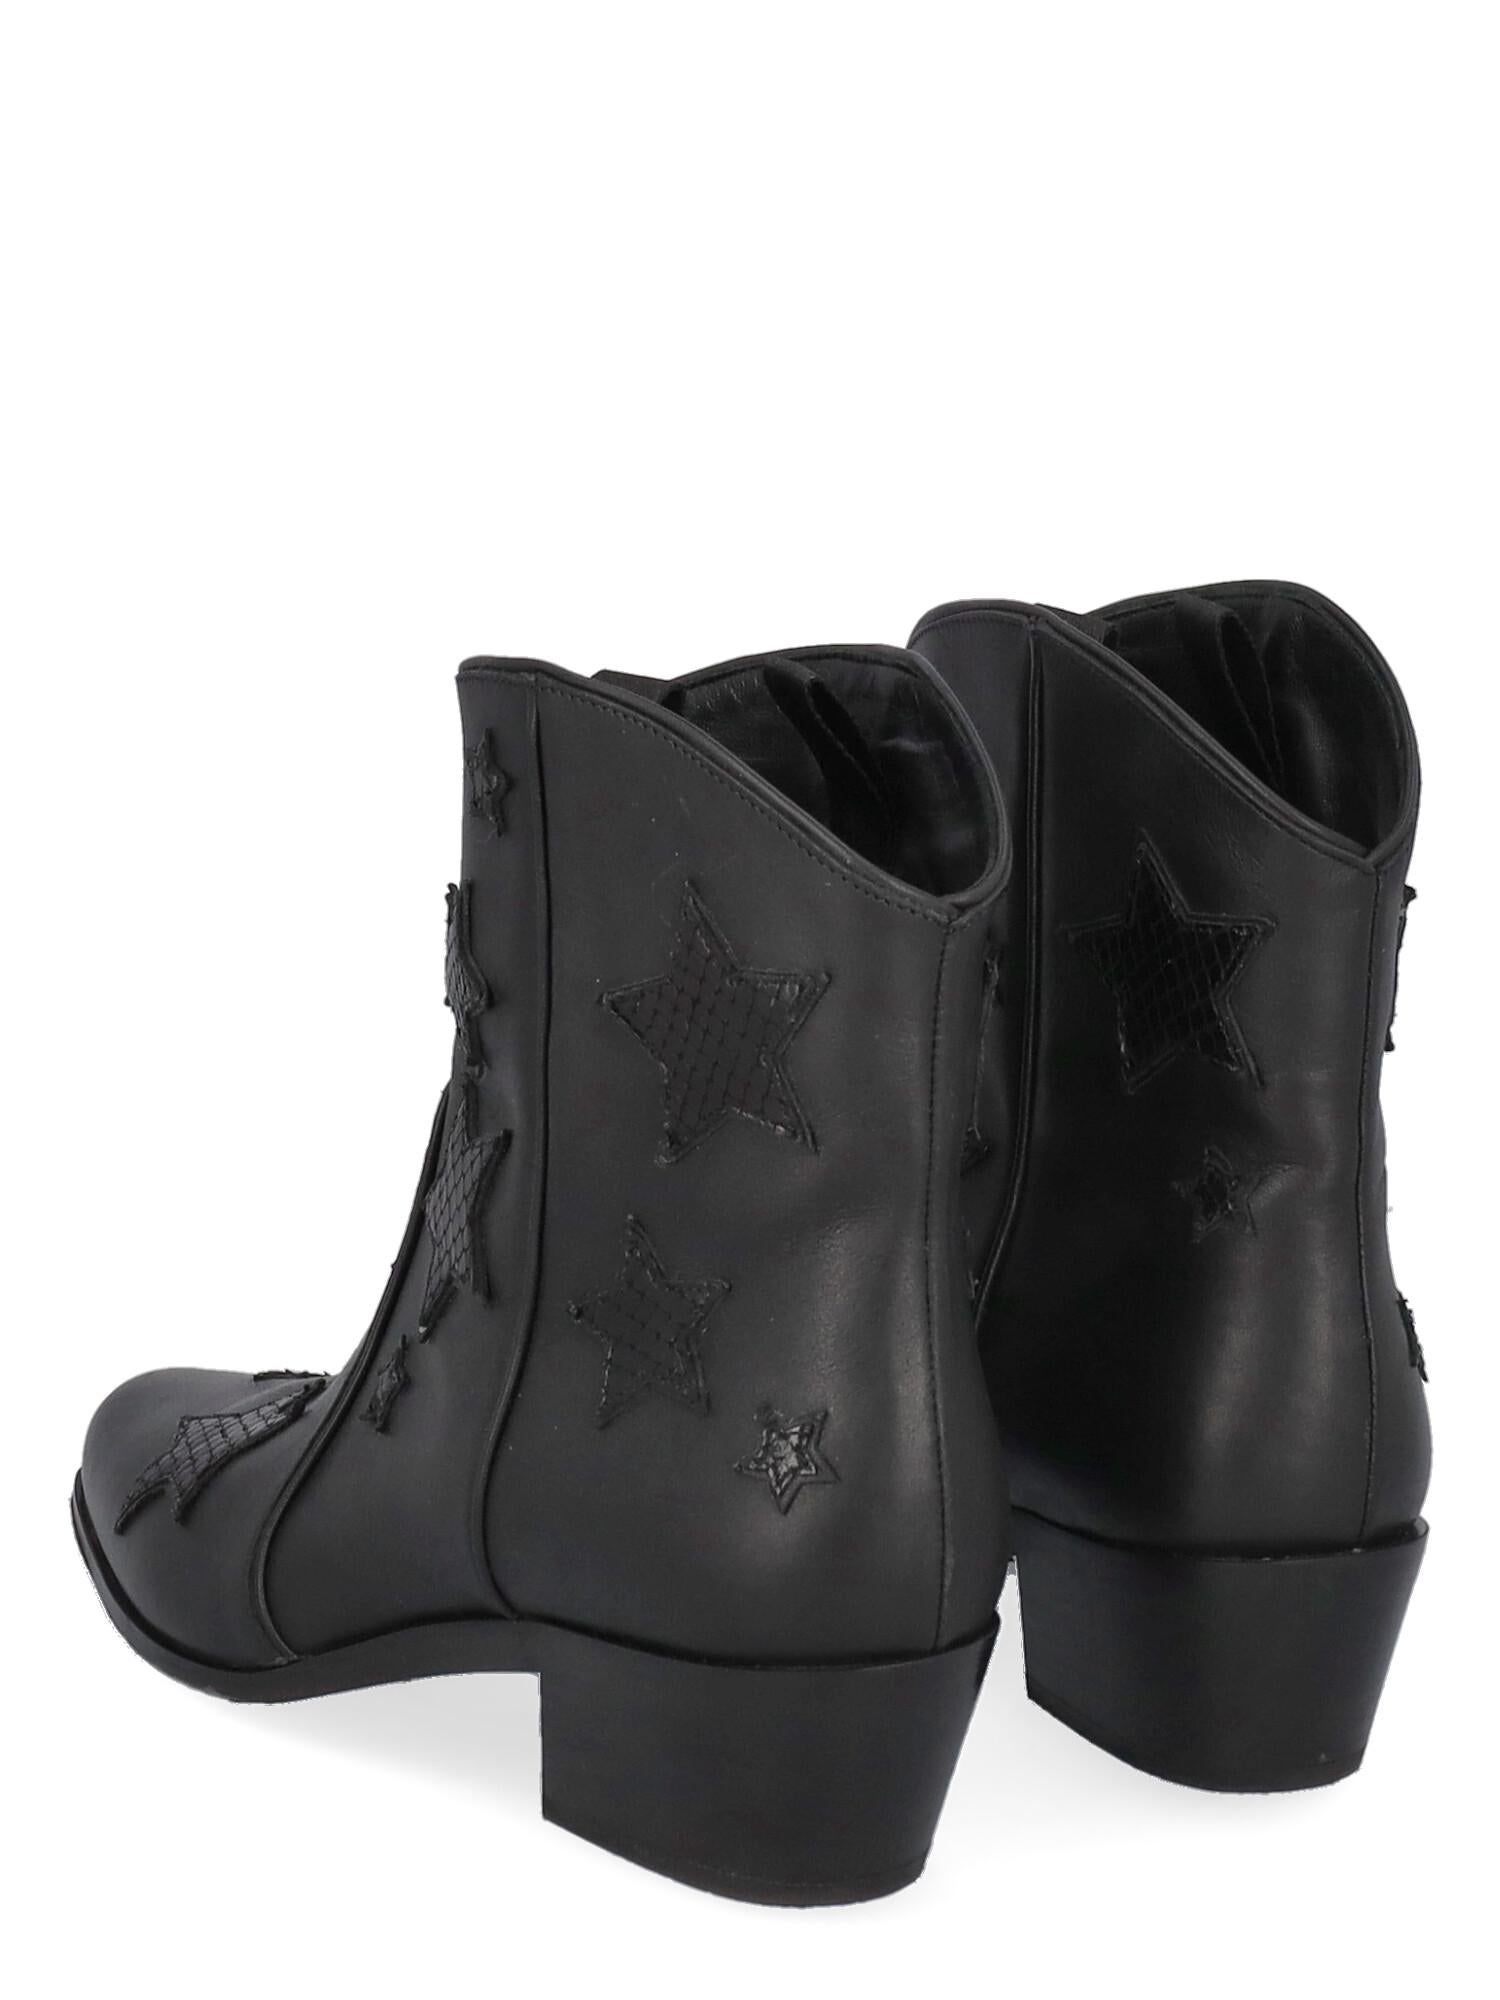 Miu Miu Women Ankle boots Black Leather EU 37 In Good Condition For Sale In Milan, IT